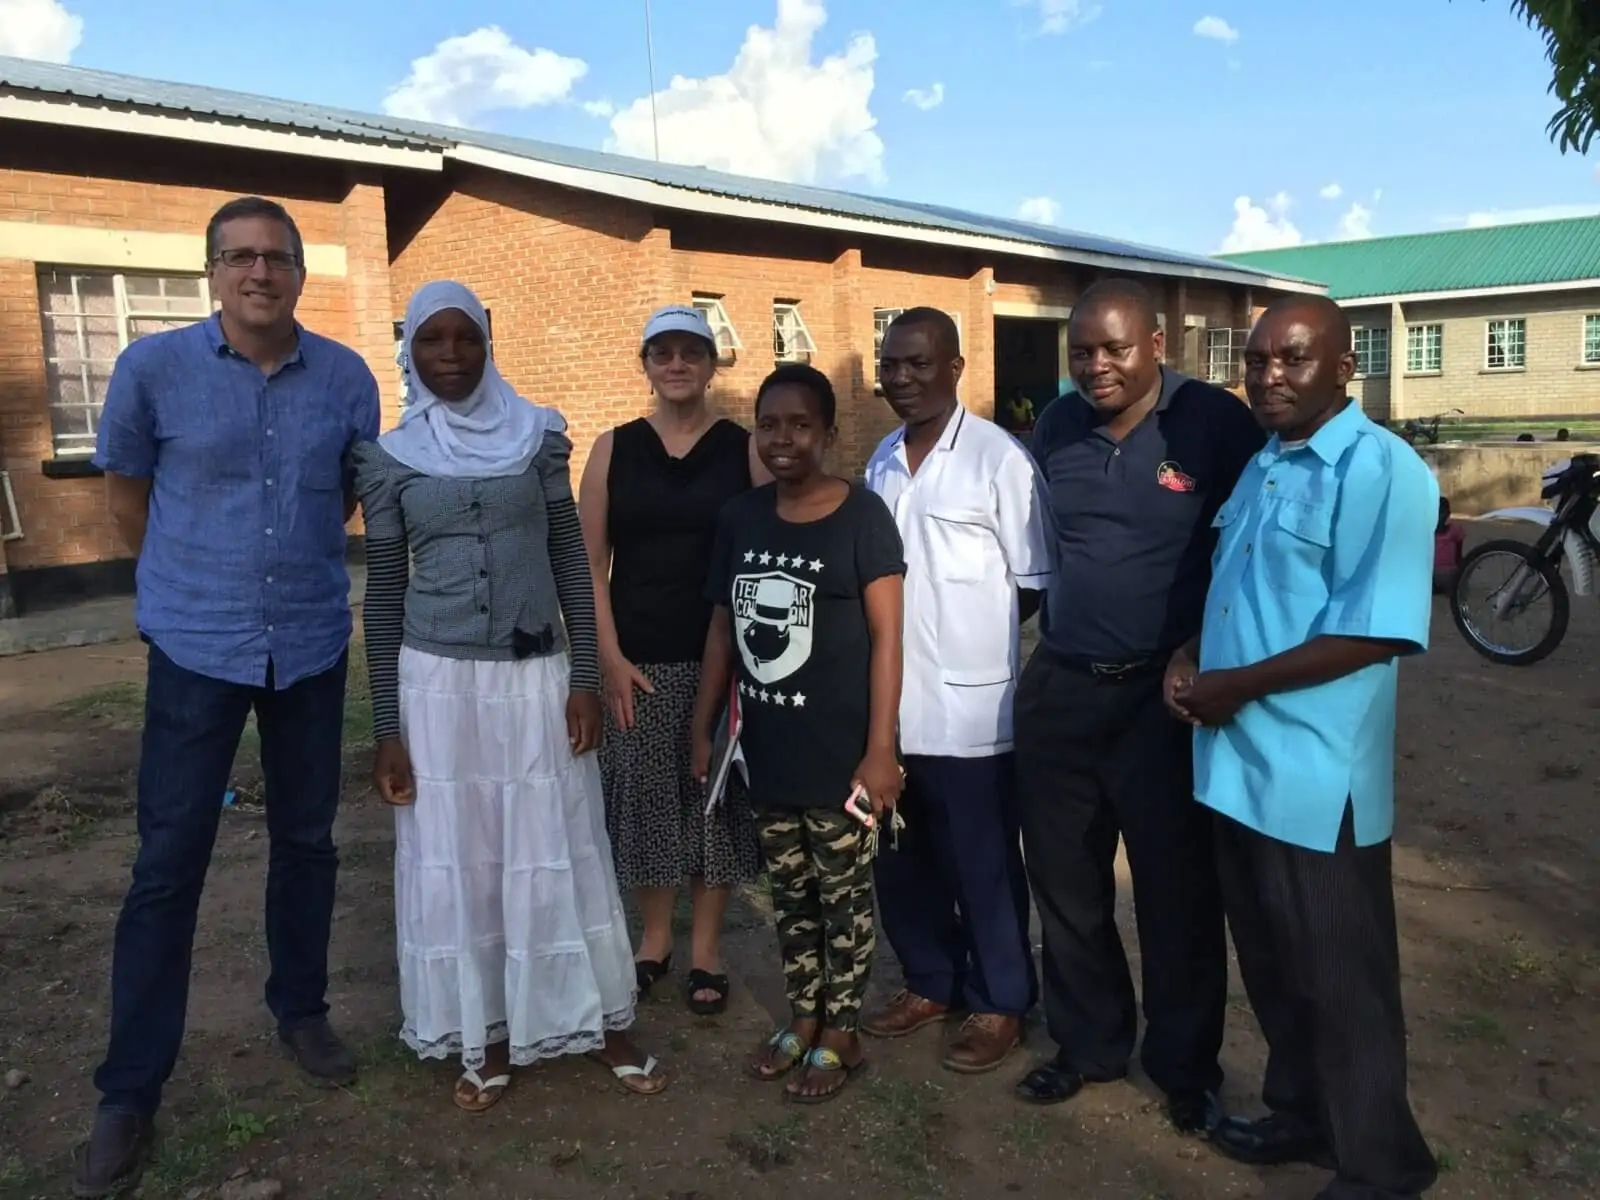 Michael Nyenhuis and Dr. E. Anne Peterson of Americares with staff from the Malombe health center in Malombe, Malawi.